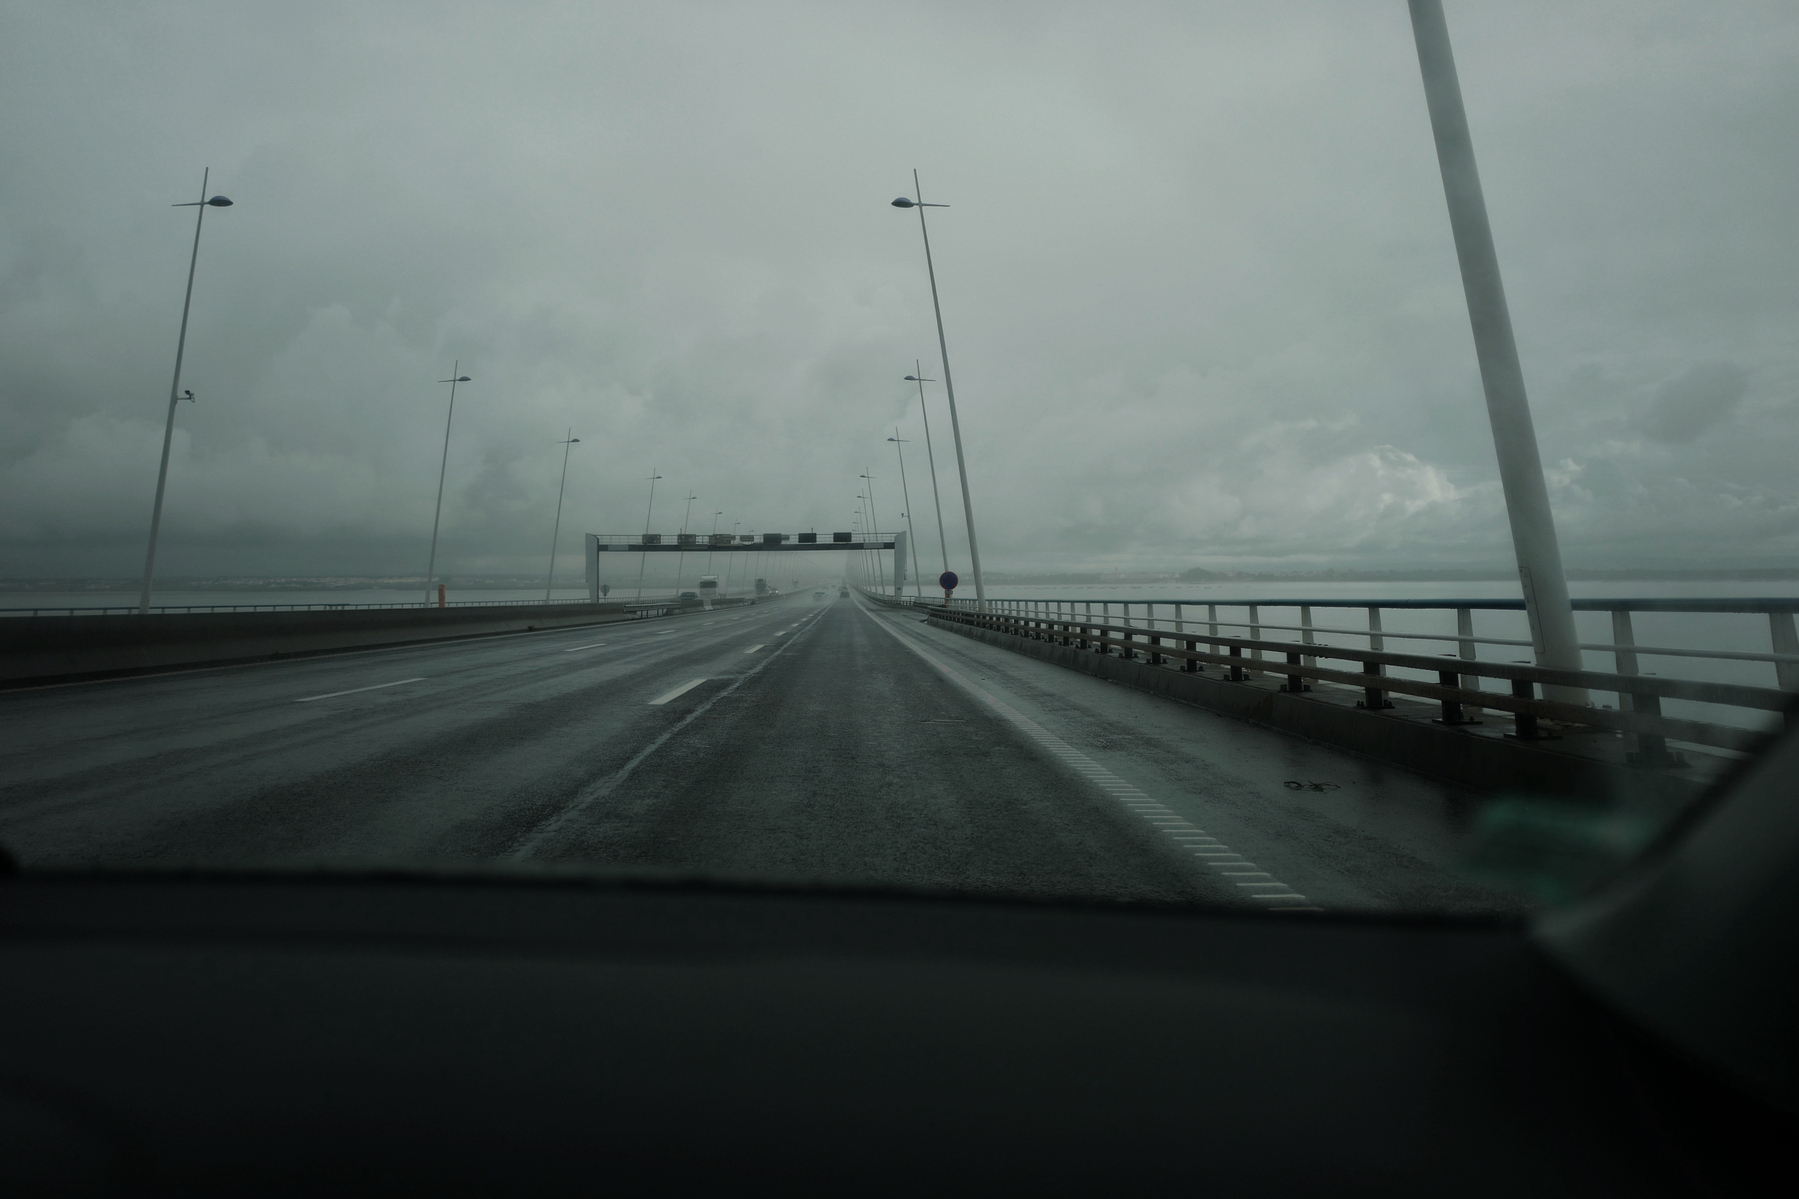 View from inside a car approaching a bridge during rainy weather, with overcast skies and wet road surface. Street lights line the sides of the bridge.